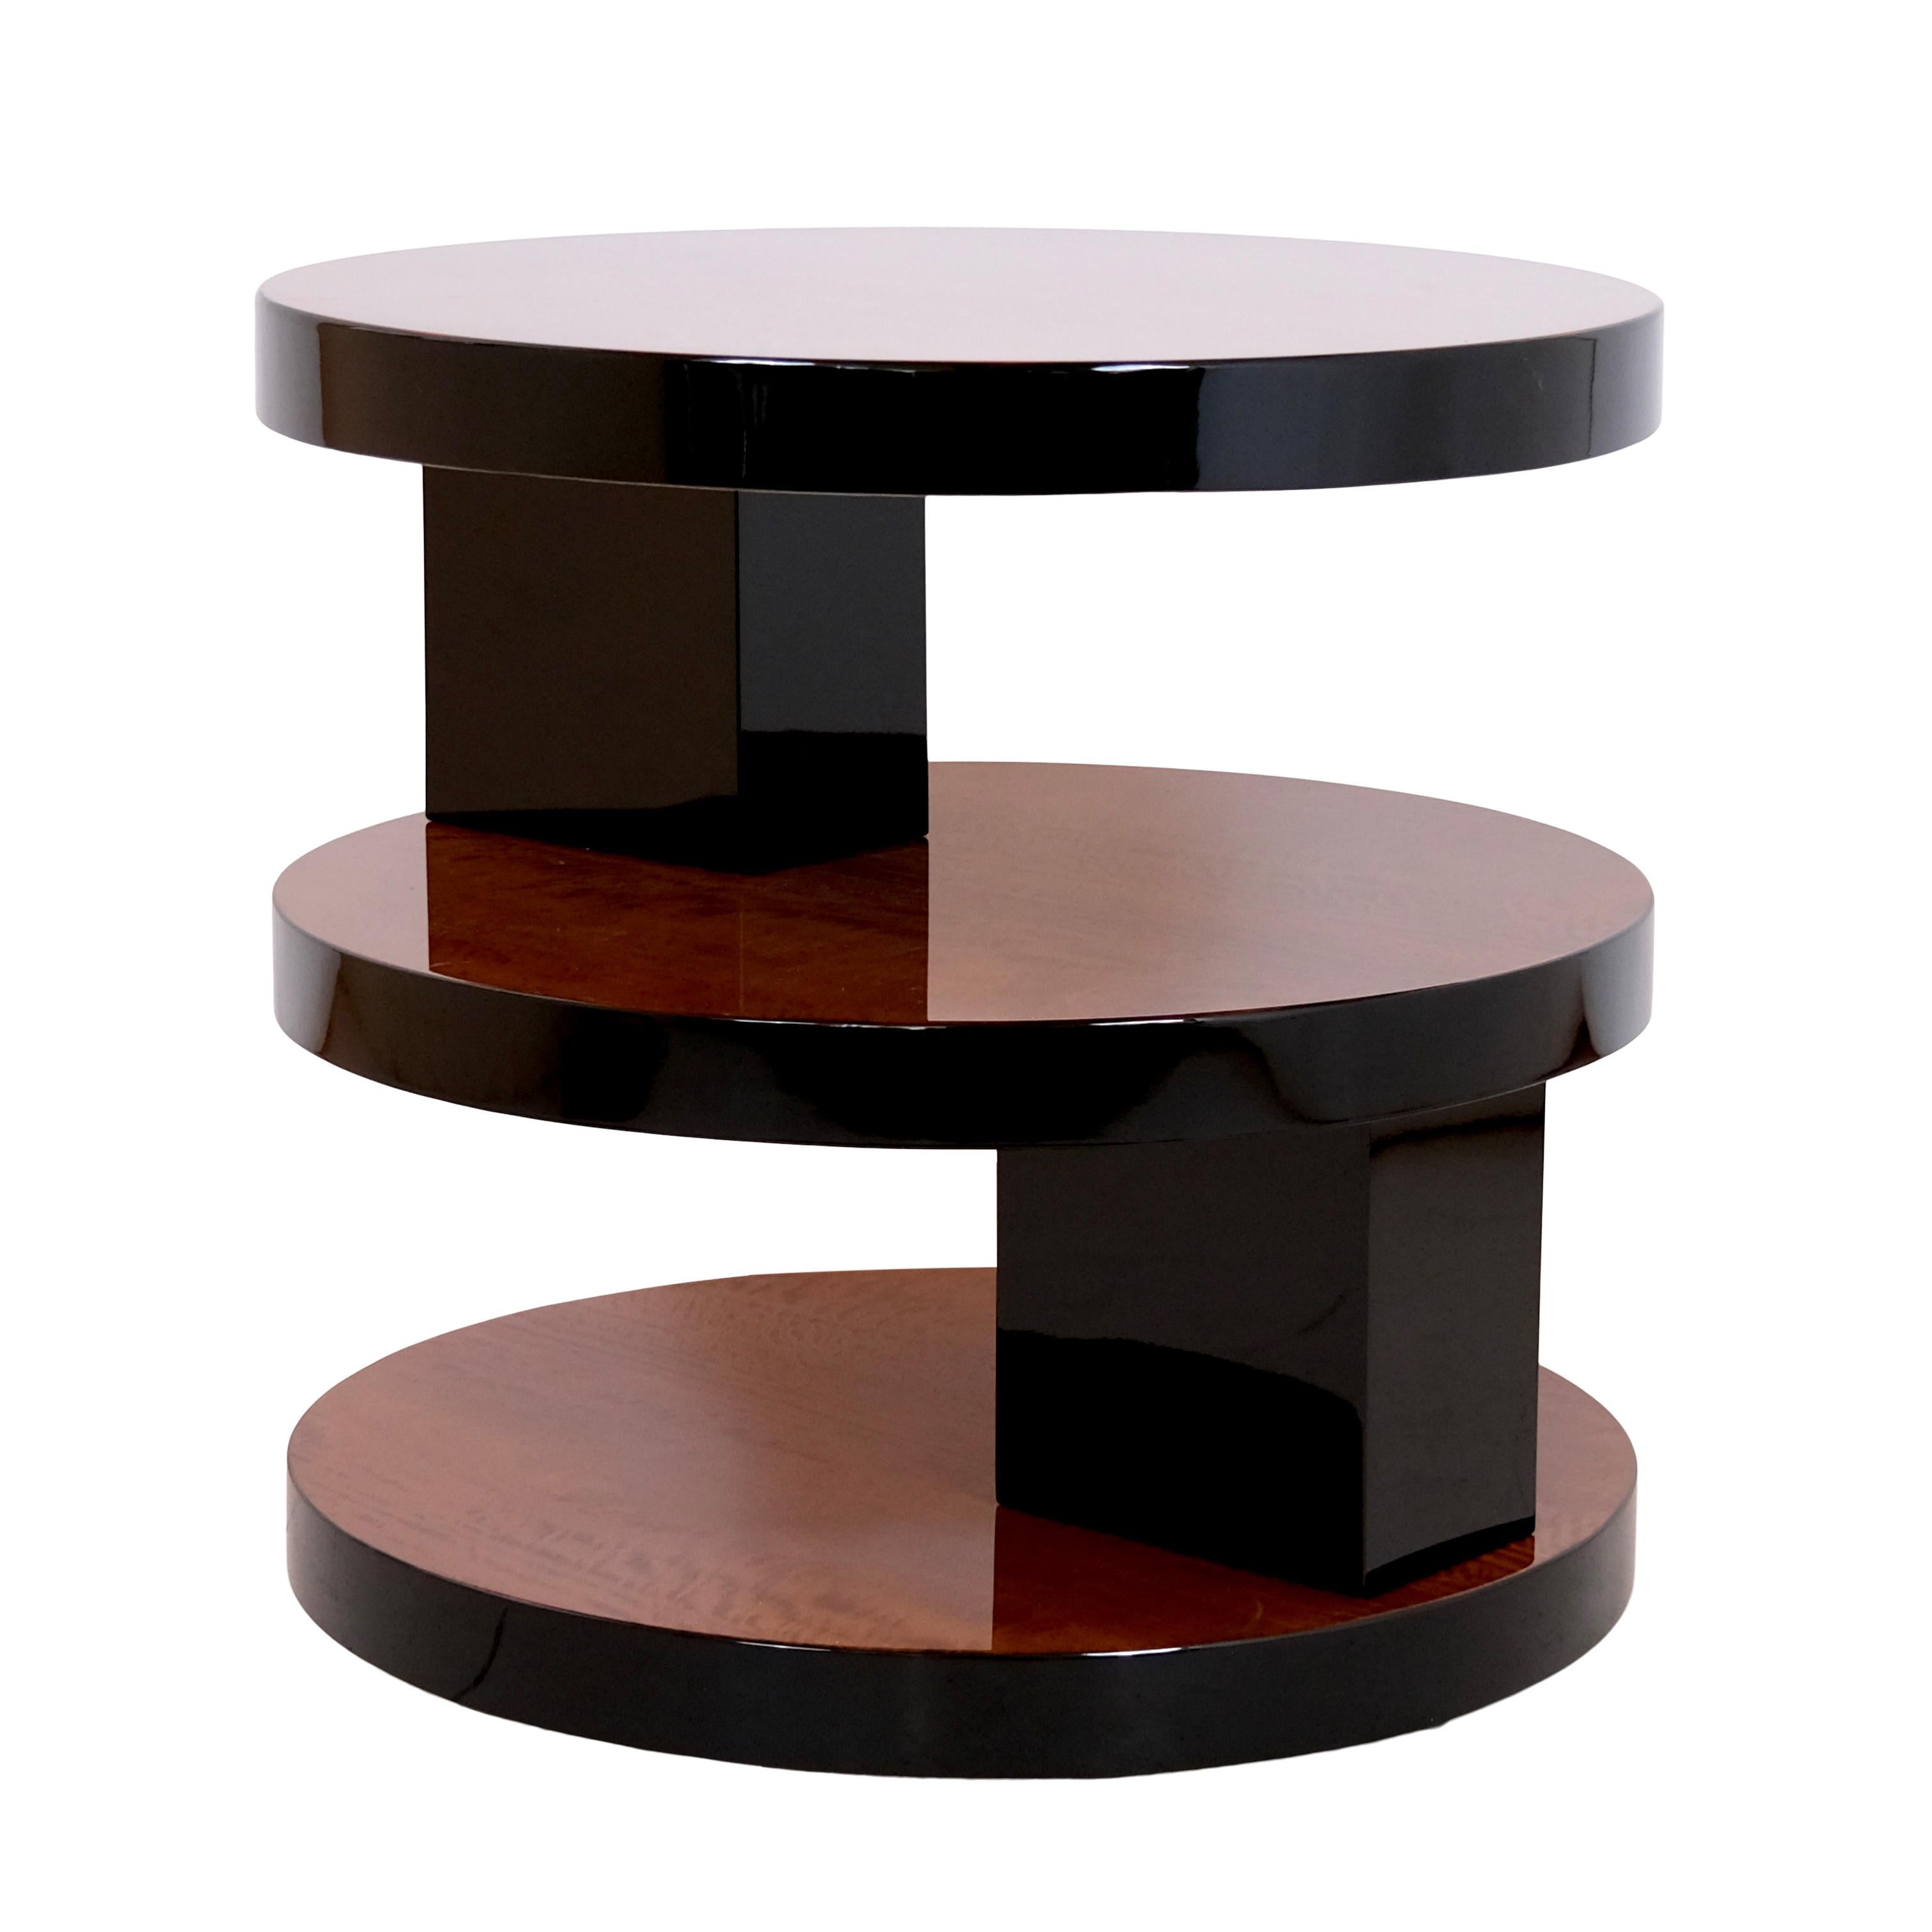 Round side table with three levels
Mahogany, high gloss lacquer and piano black high gloss lacquer

Original Art Deco, France, 1930s

Dimensions:
Diameter: 66.5 cm
Height: 64 cm